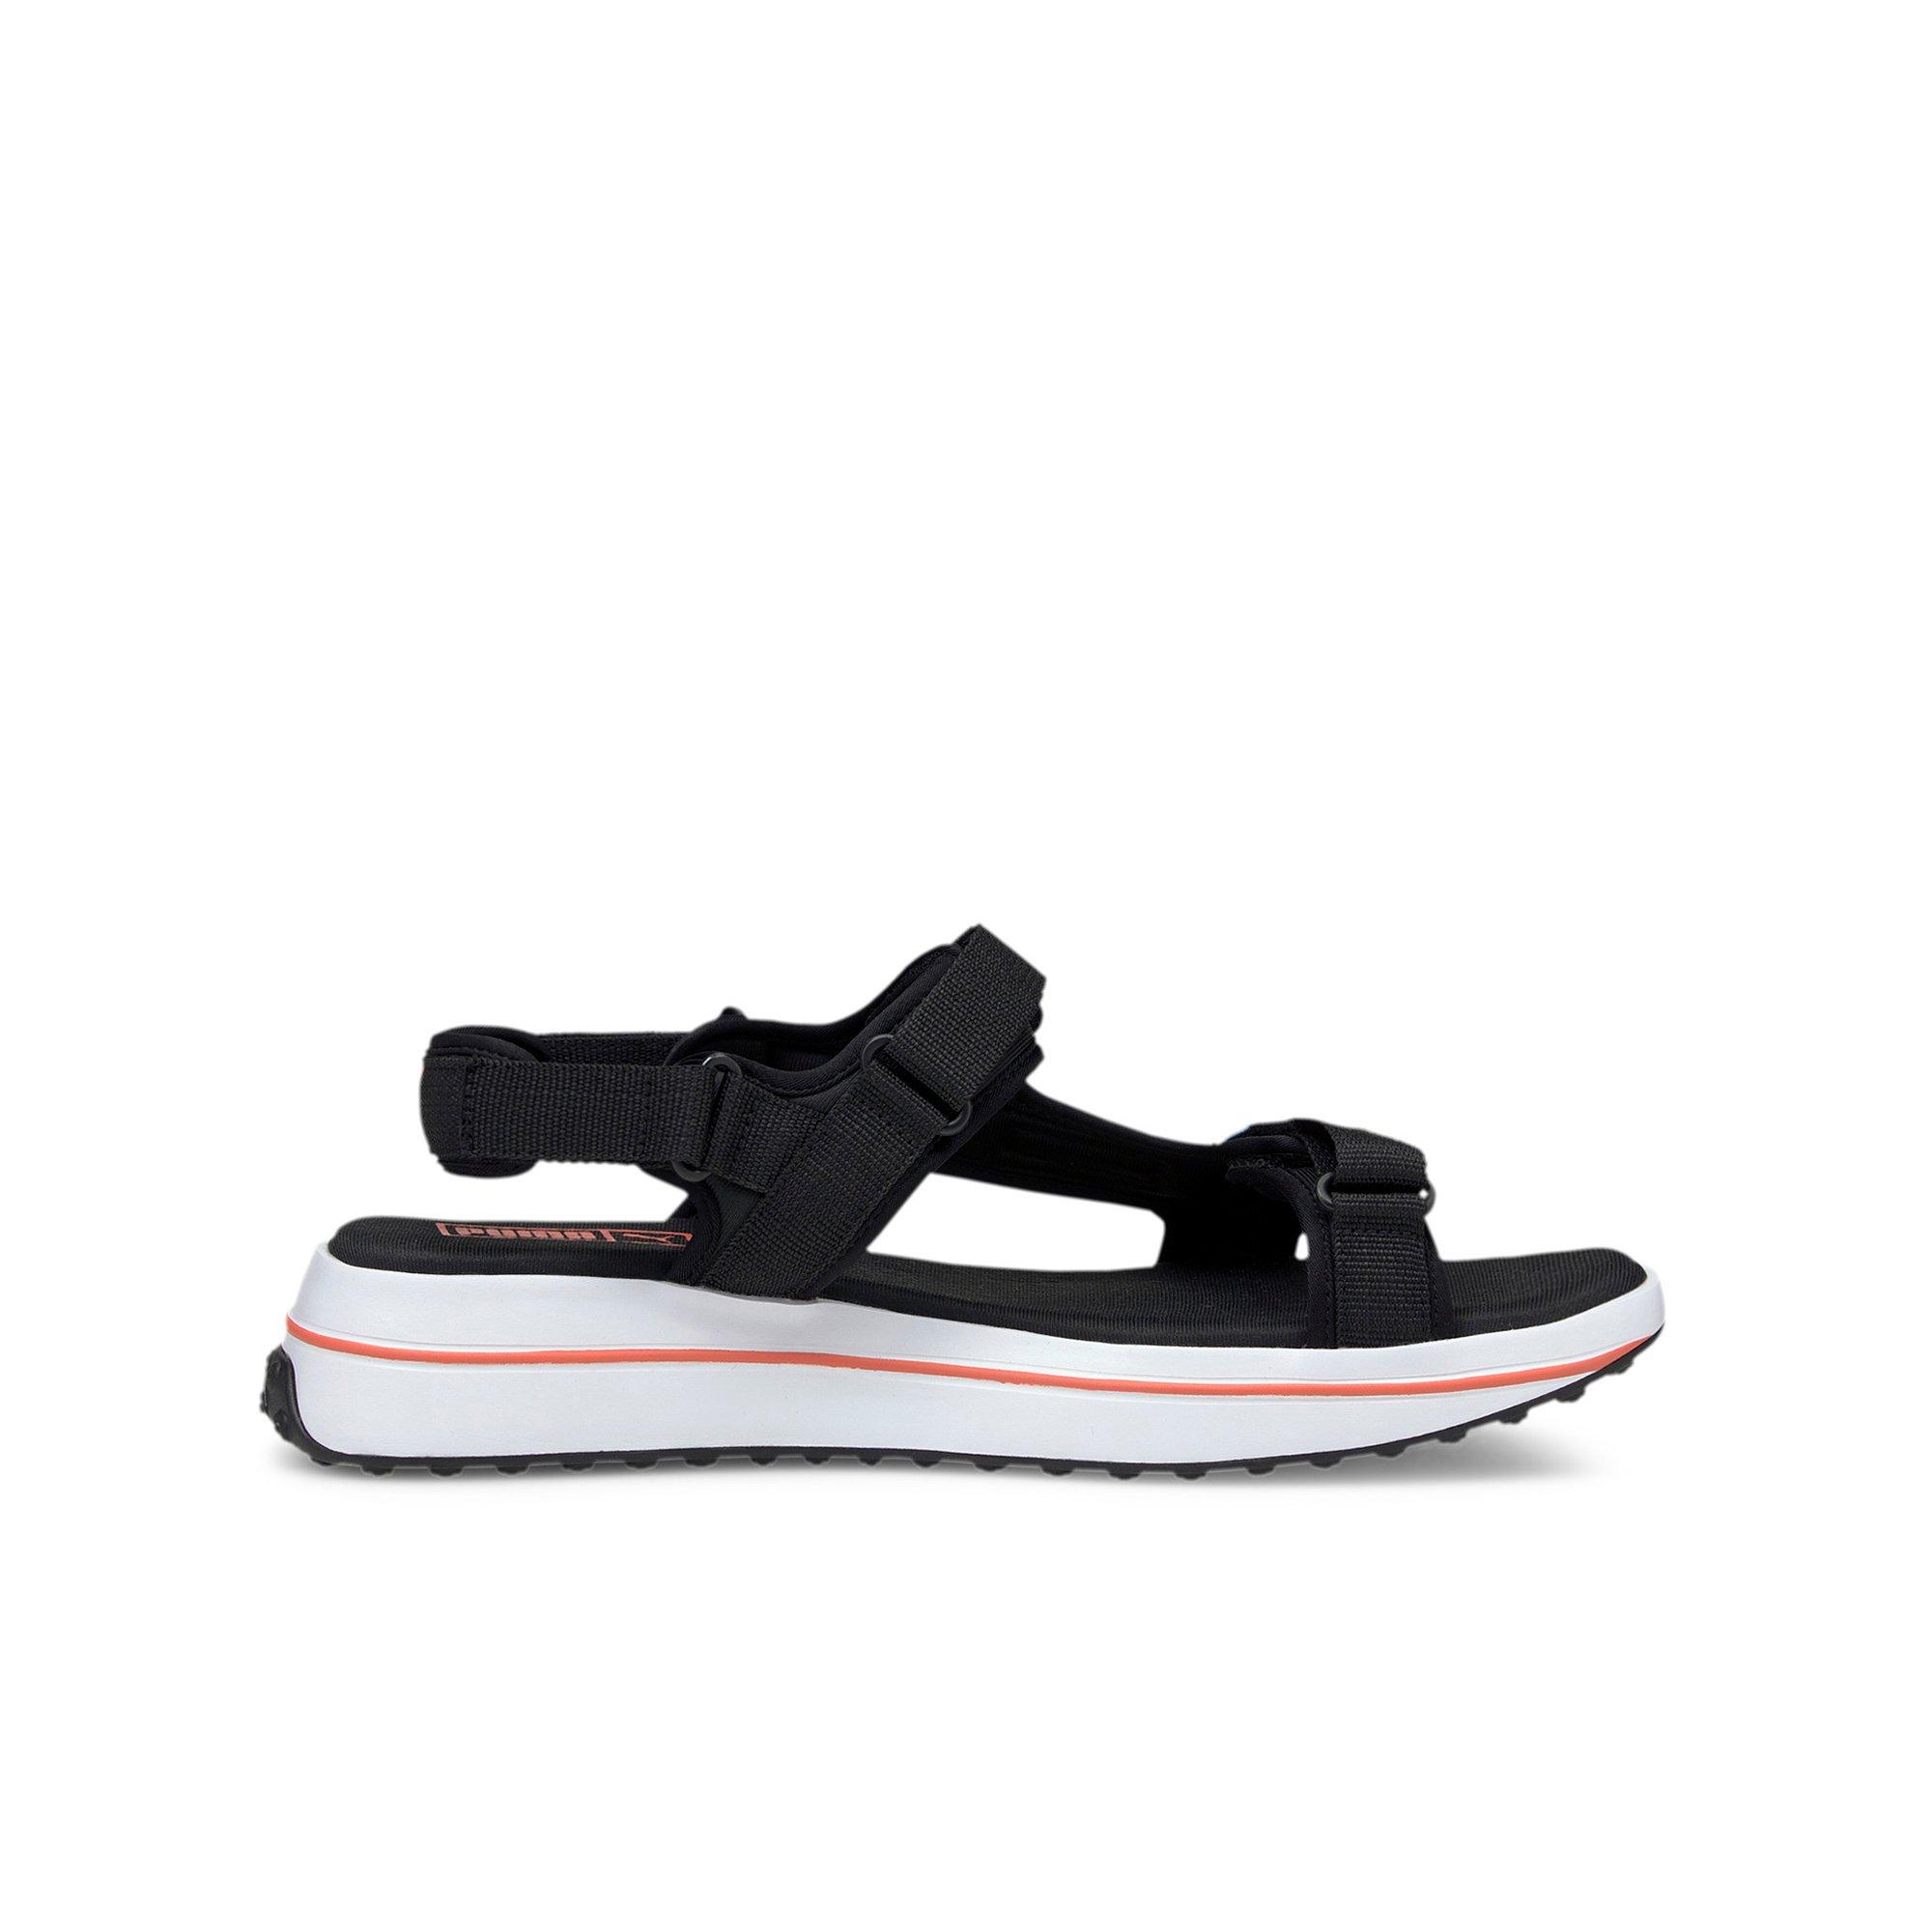 puma sandals for womens with price